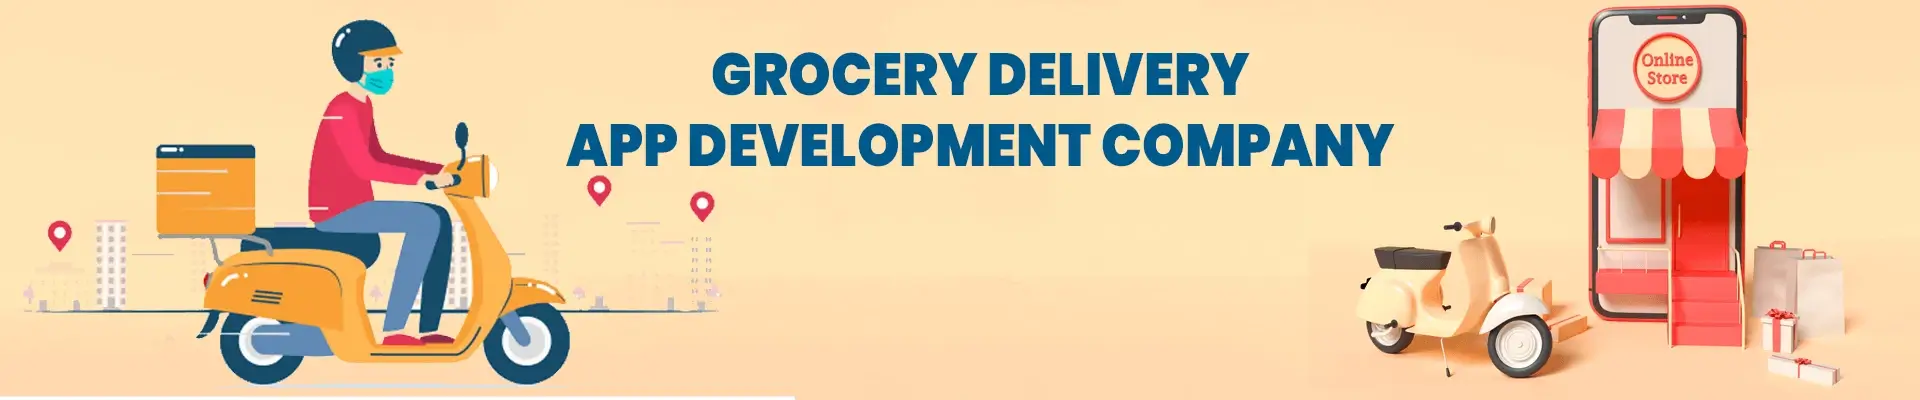 Grocery Delivery App Development Company | Grocery Delivery App Developers For Hire